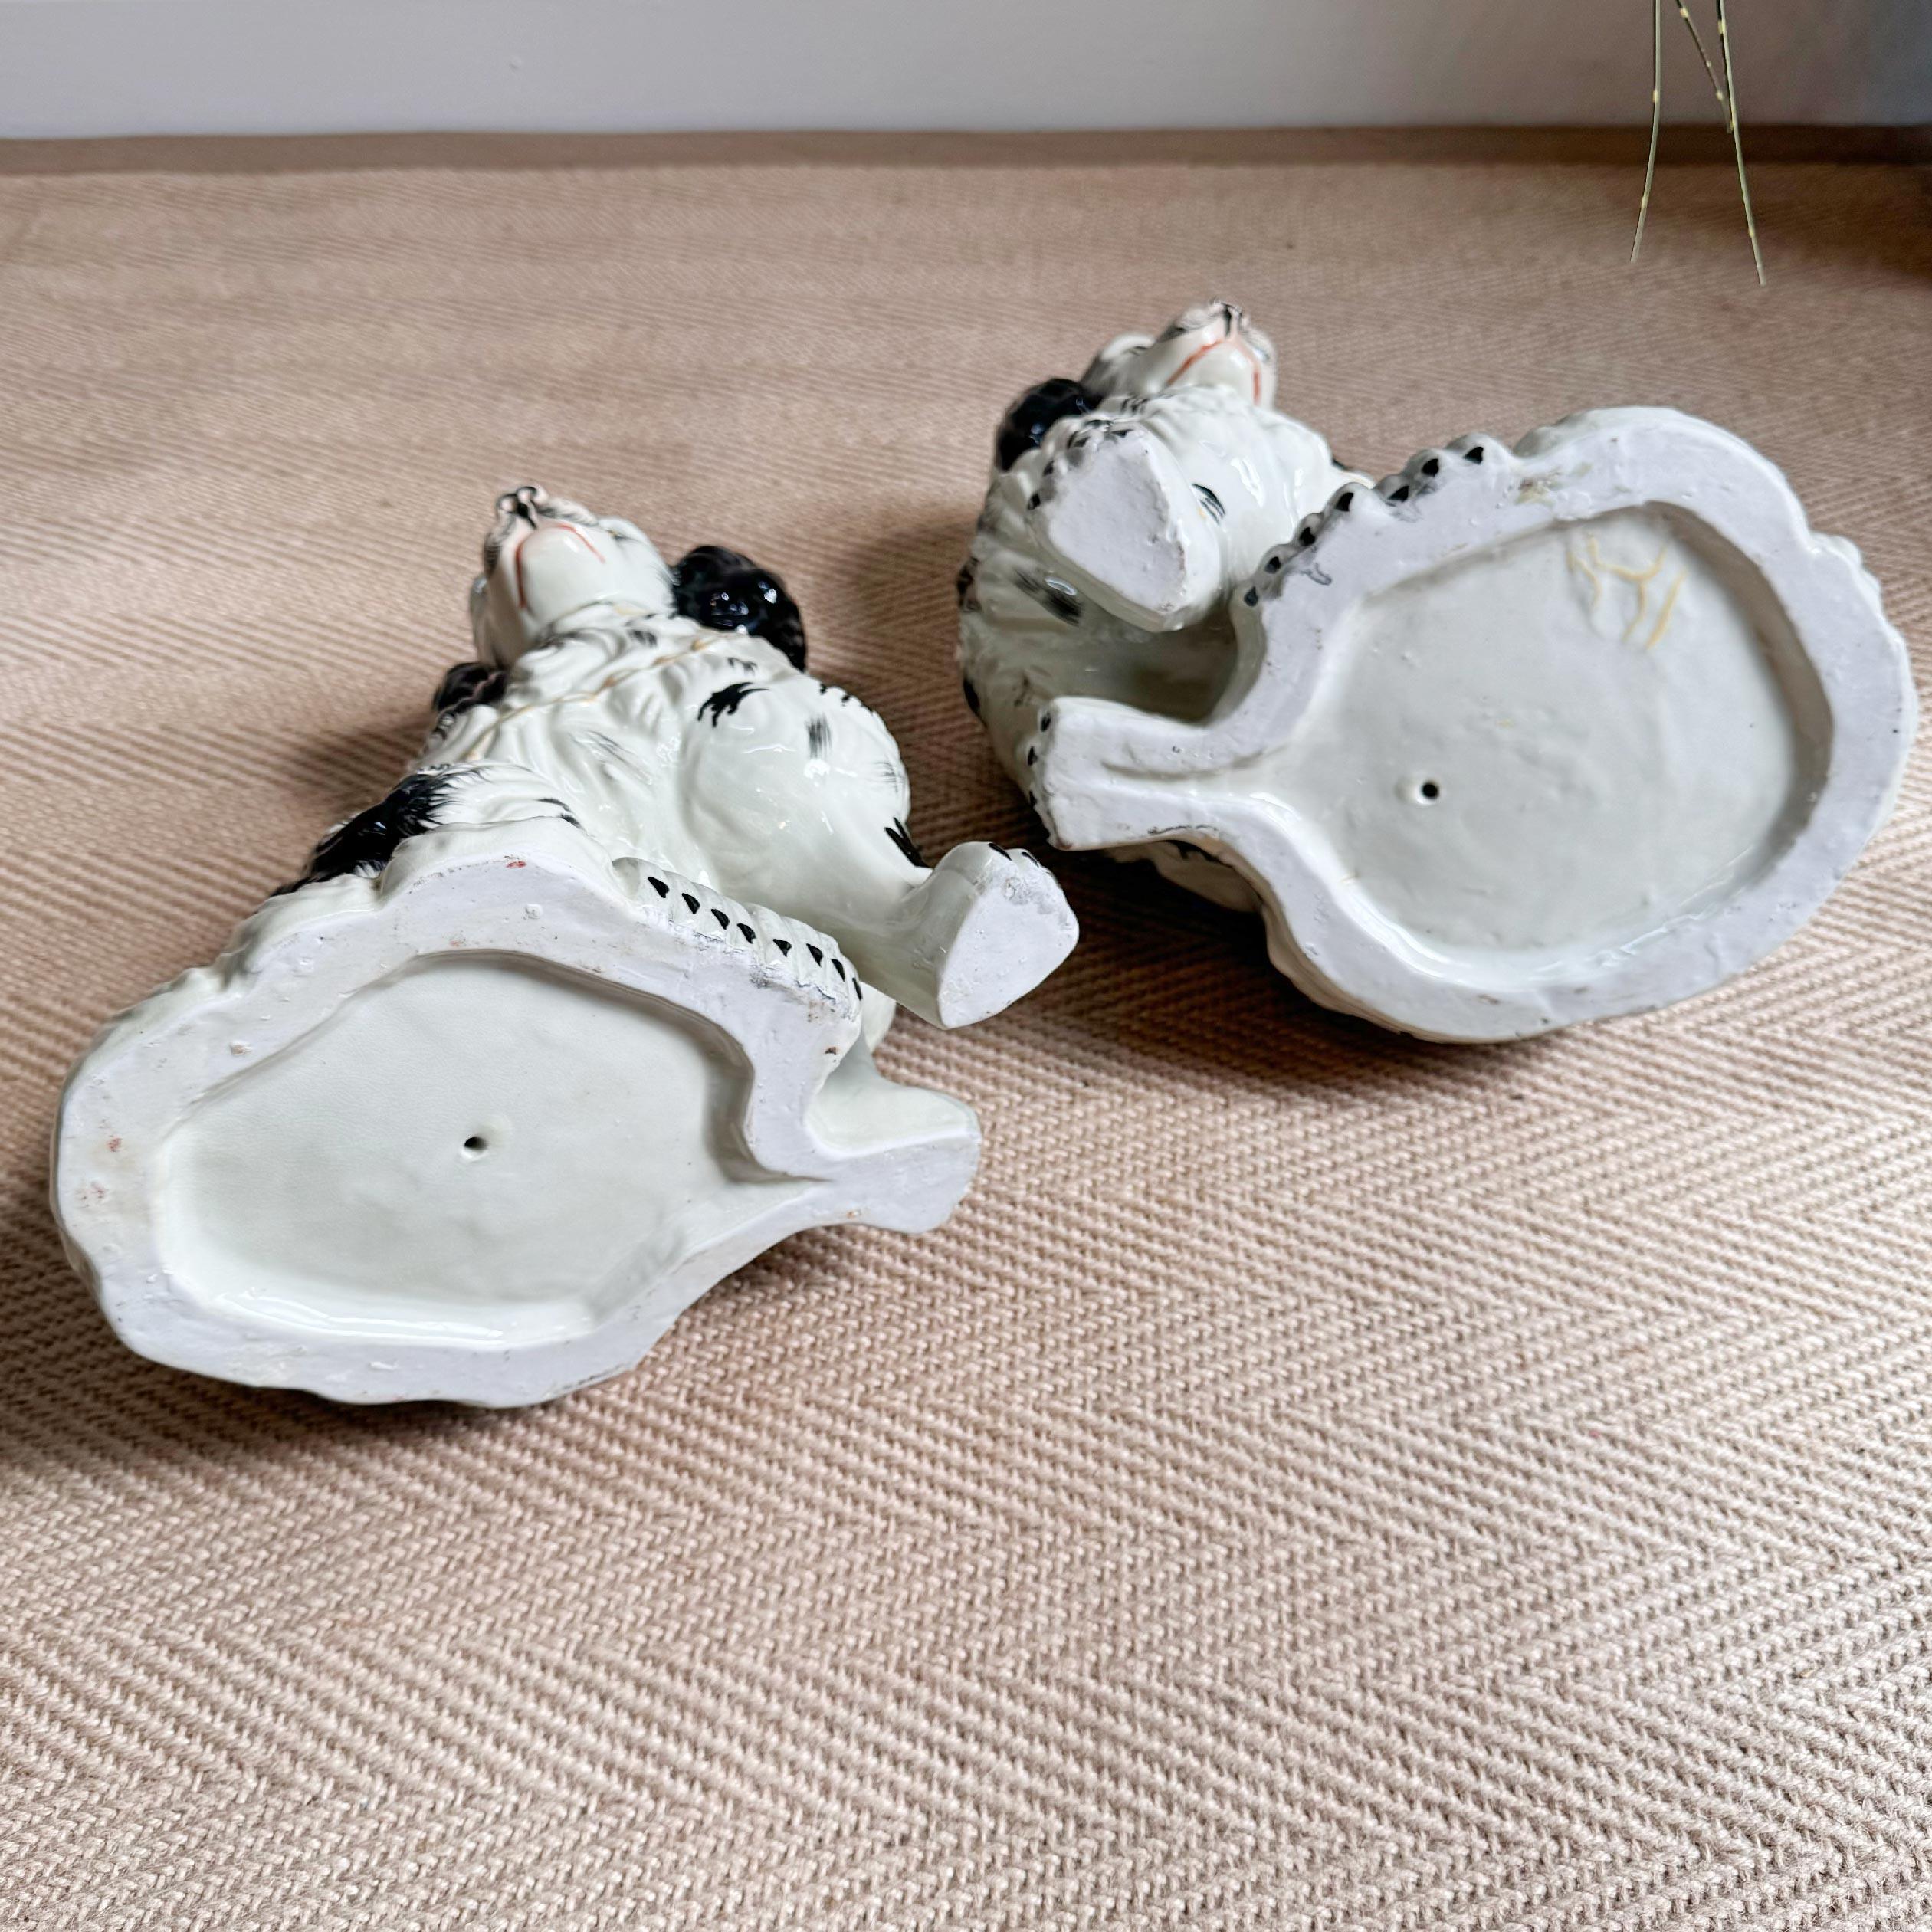  Pair of 19th Century Staffordshire Dogs 8